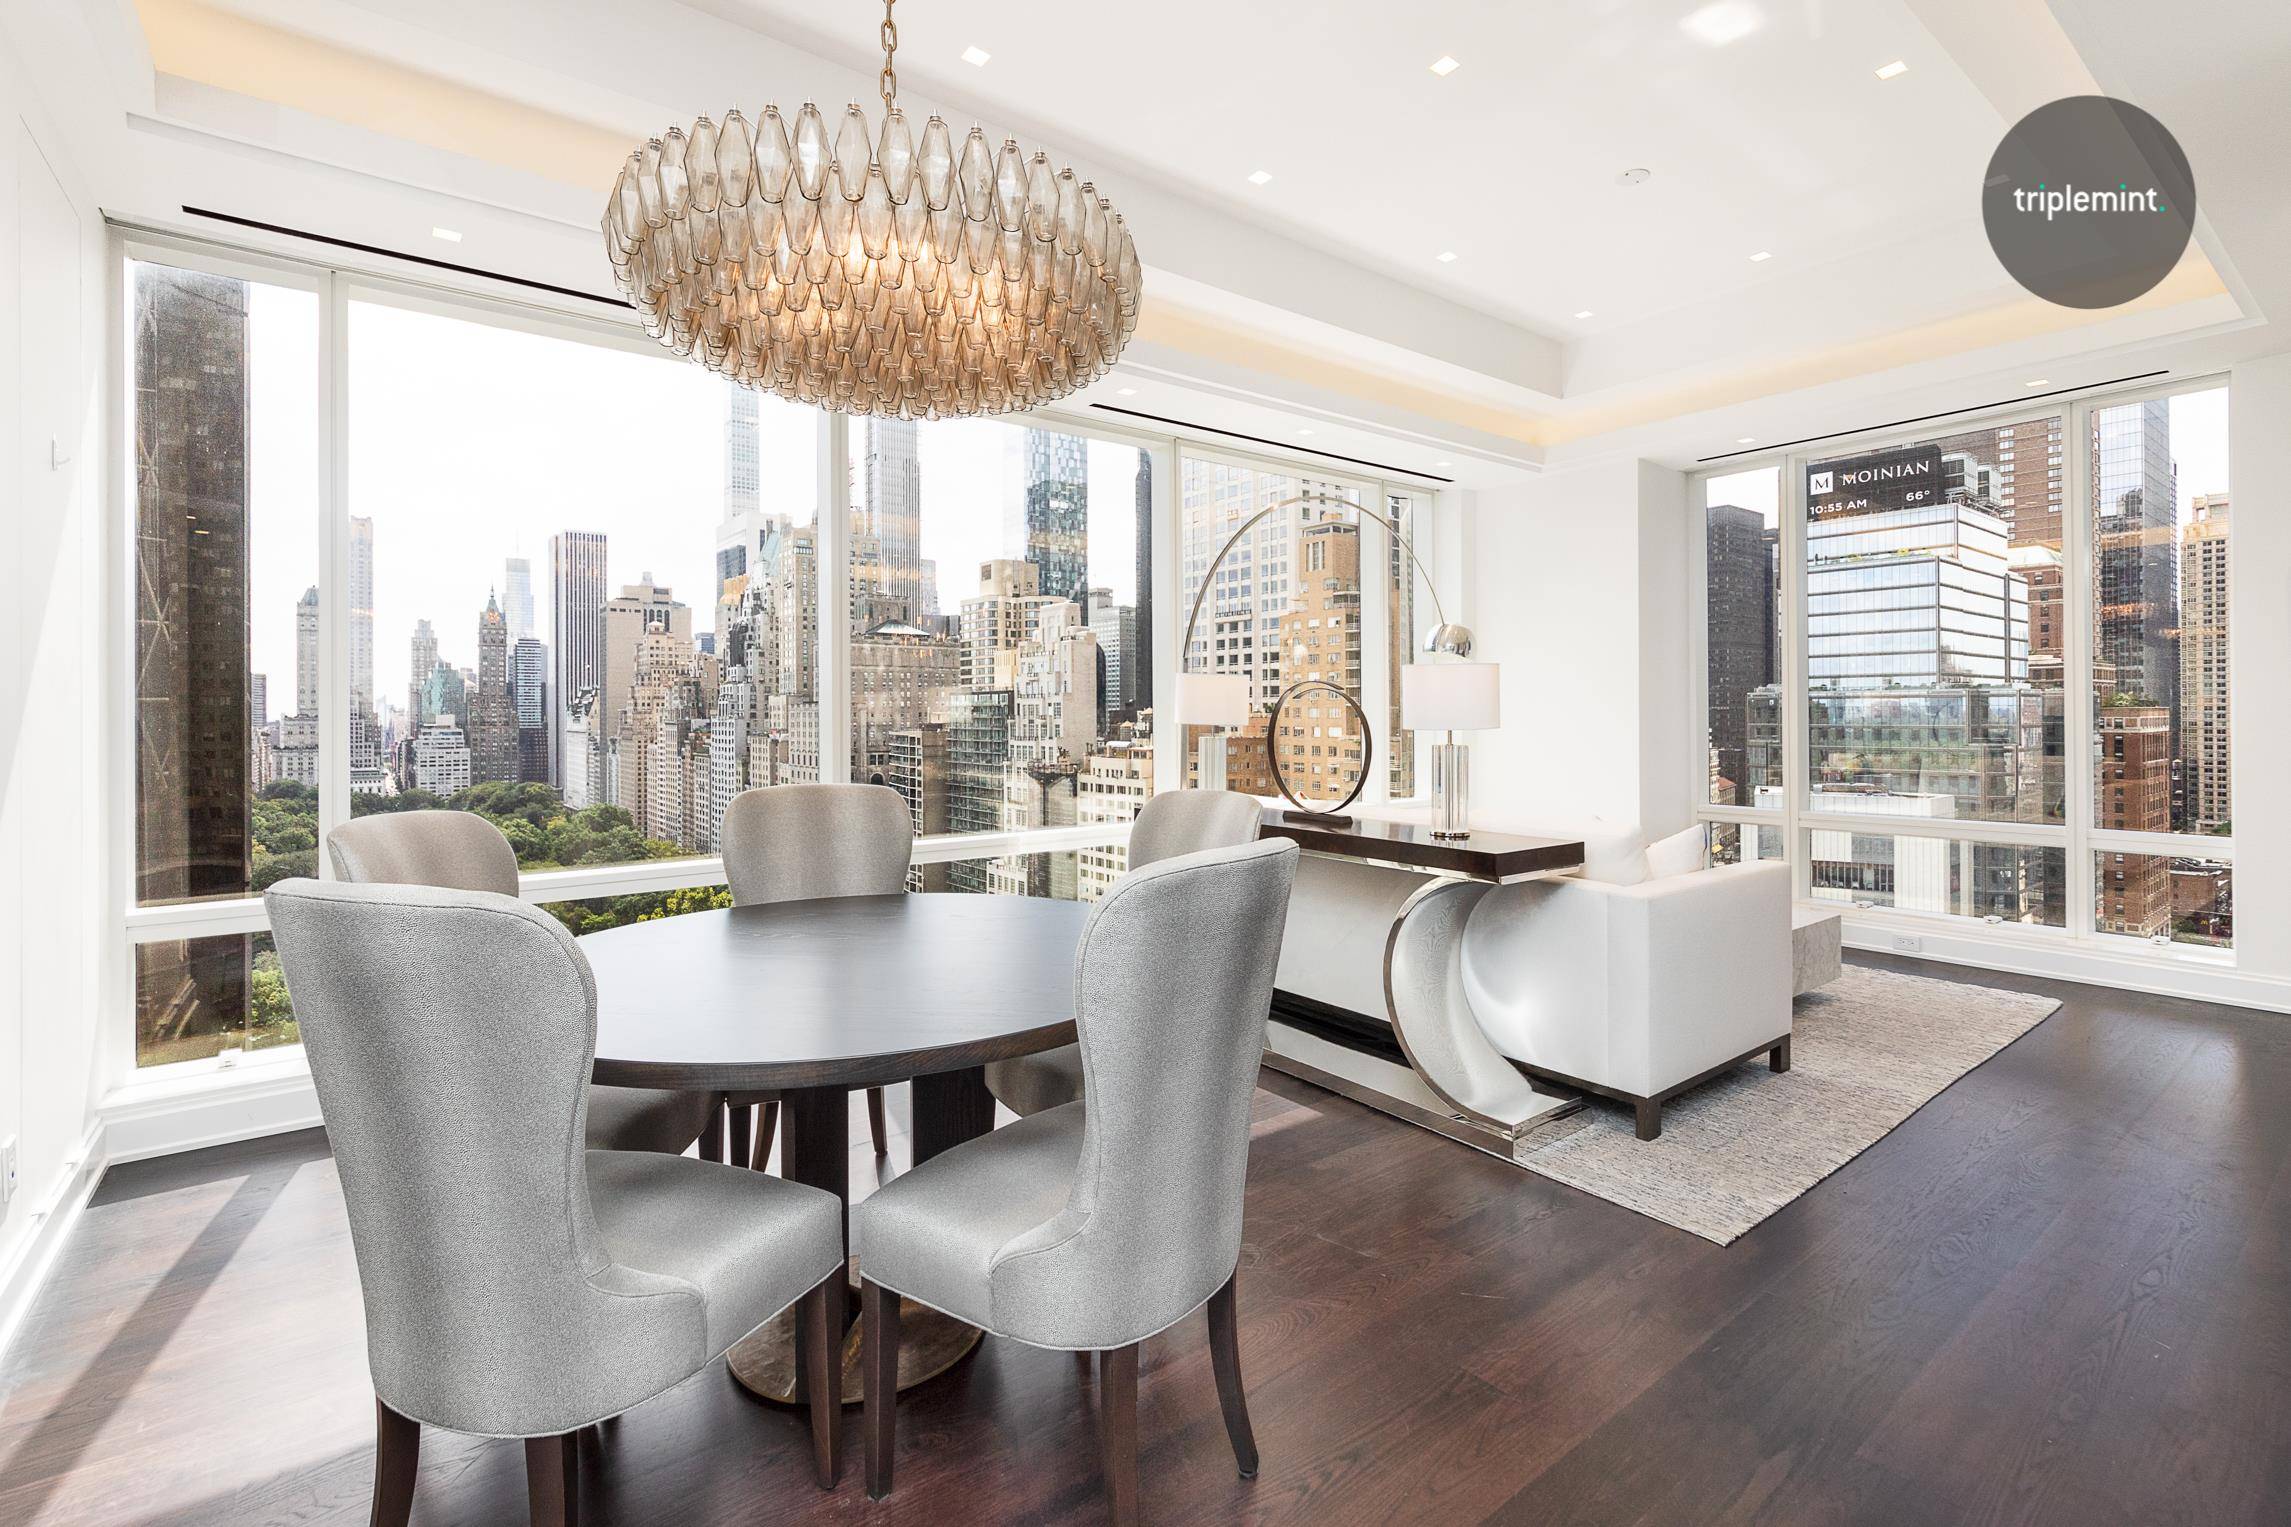 Fresh off a multi million dollar gut renovation by one of the top design teams in Manhattan, 23D is ready for the buyer seeking the highest quality home in Columbus ...